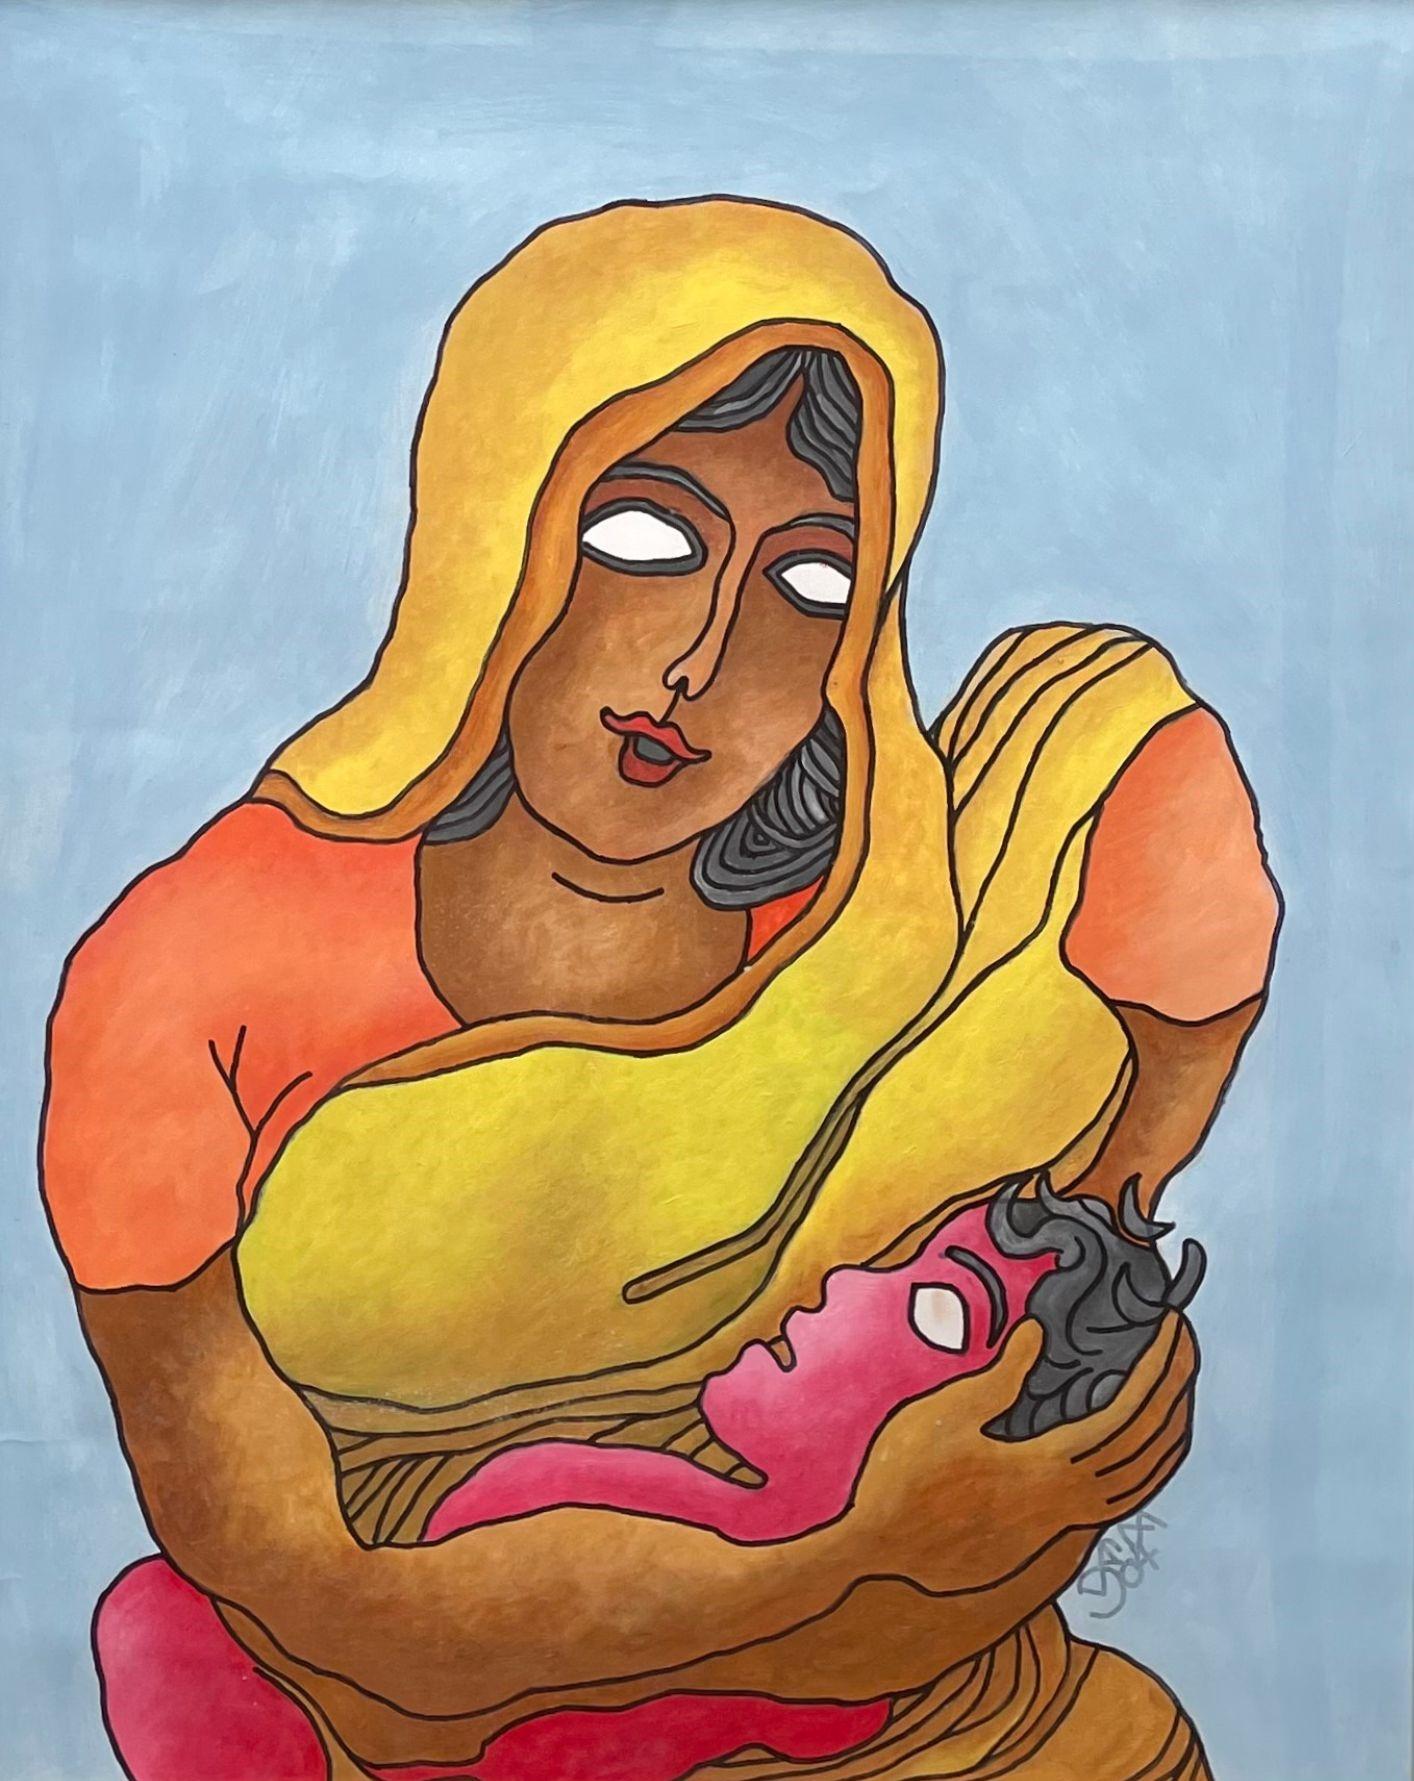 Mother & Child, Acrylic on Paper on Paper by Modern Artist "In Stock" - Mixed Media Art by Prokash Karmakar